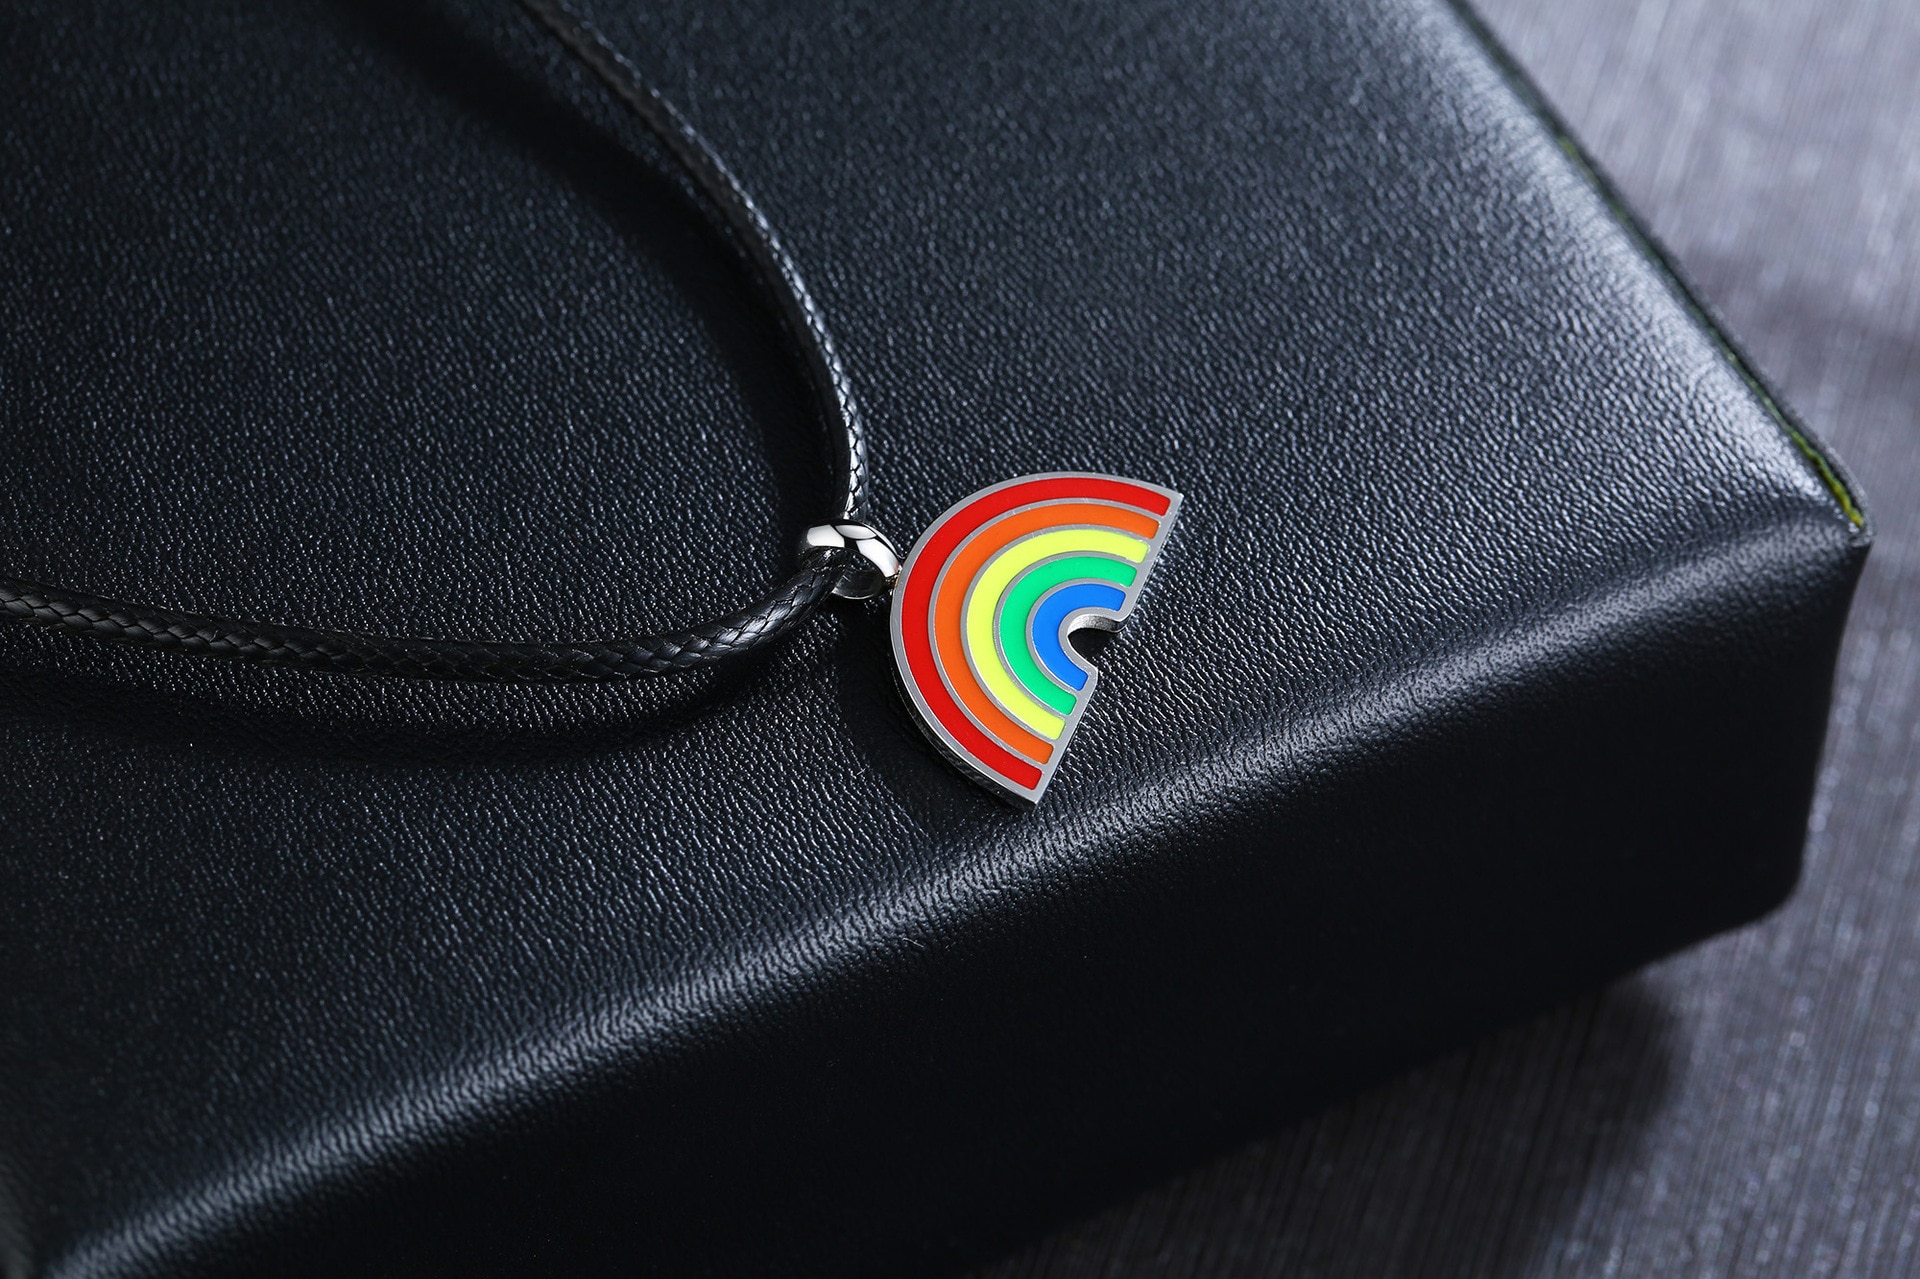 Rainbow Pendant Necklaces for Women 316L Stainless Steel Leather Rope Chain Gay & Lesbian LGBTQ Pride Men Gift Support Engraving